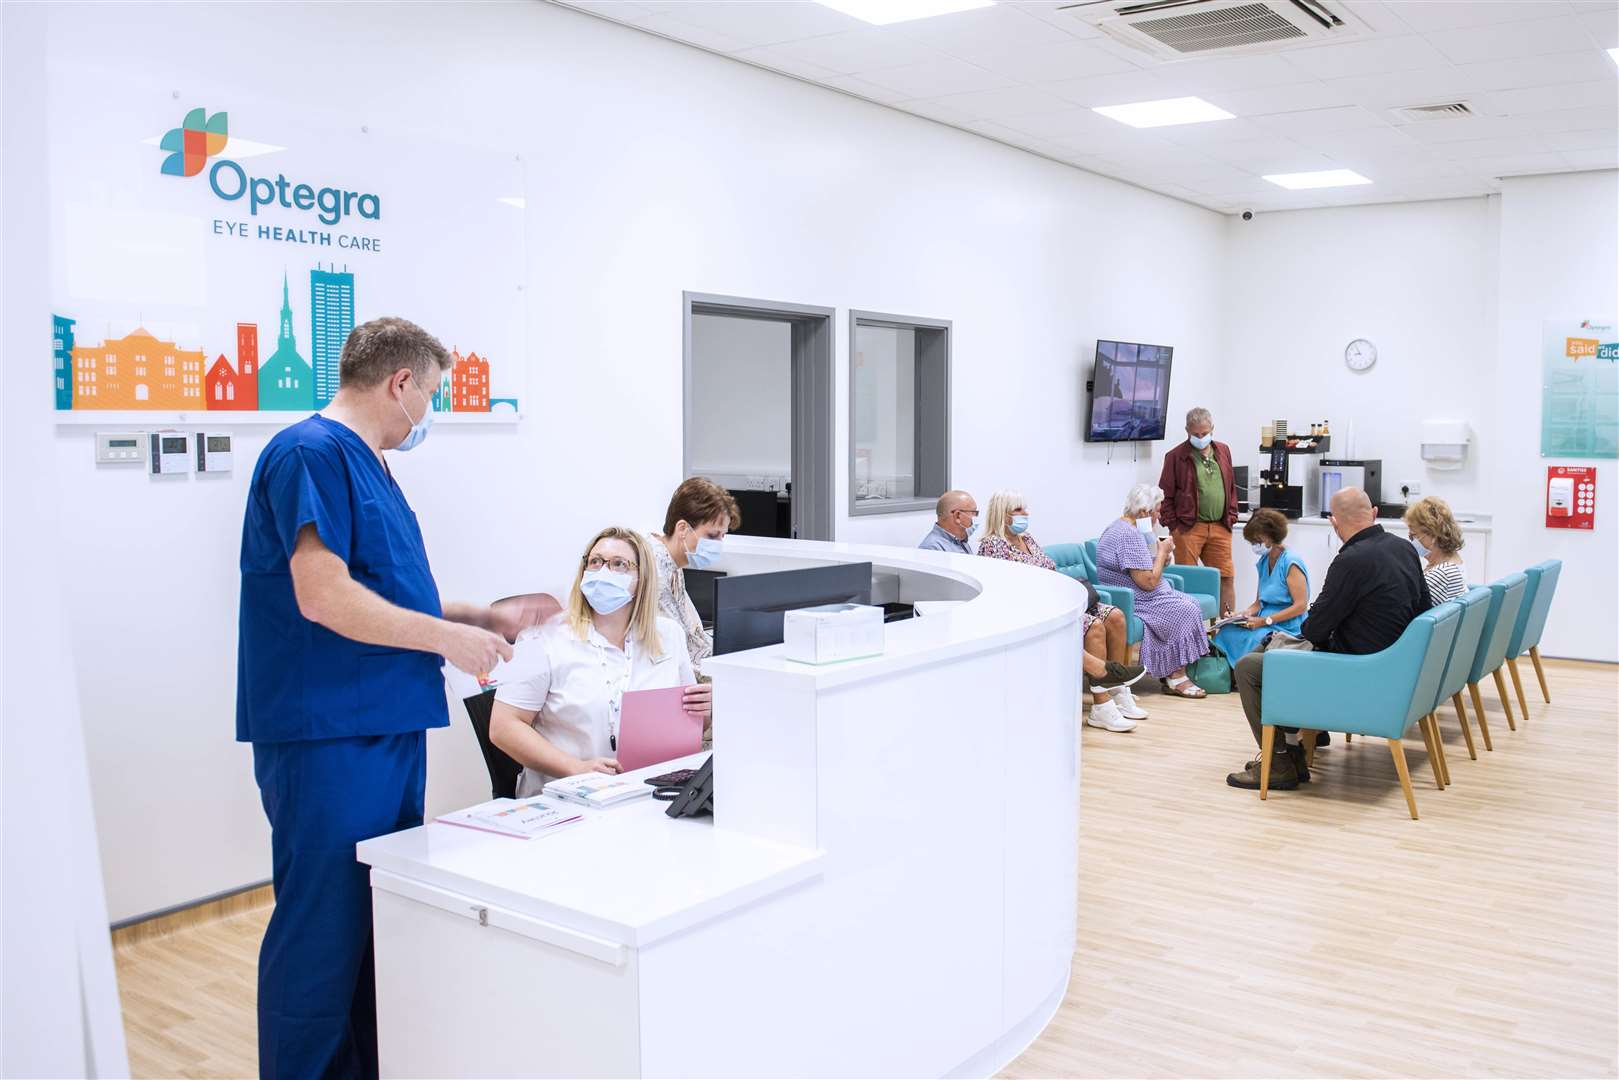 Cathy had the operation at the new clinic. Picture: Optegra